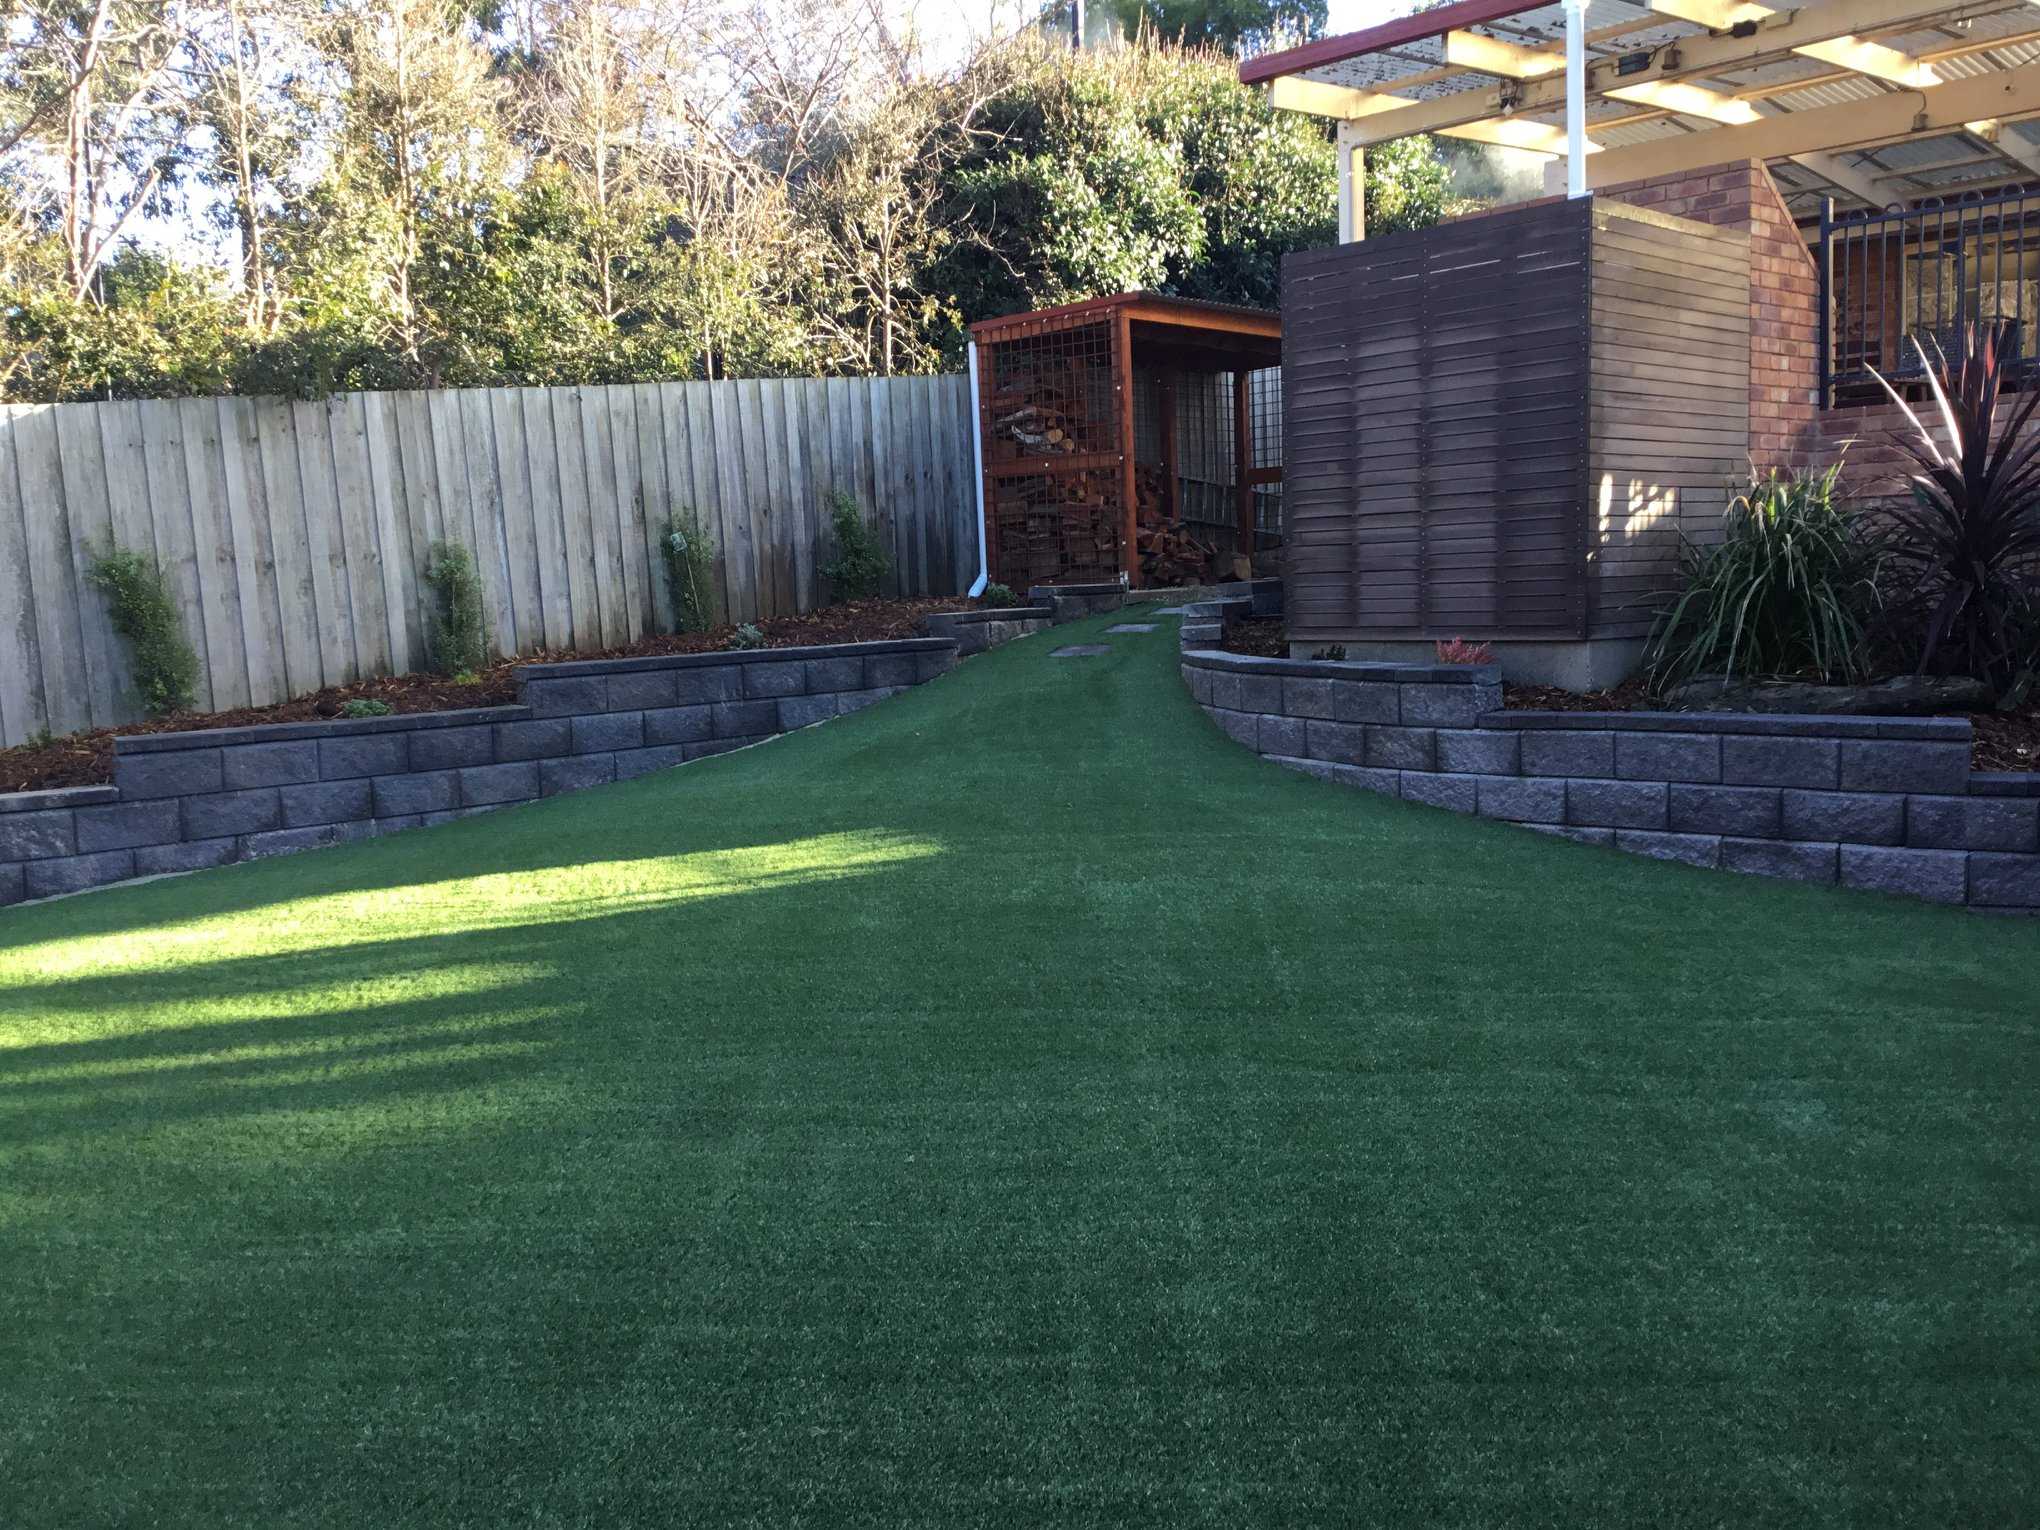 matt-artificial-residential-synthetic-fake-grass-lawn-turf-installers-installations